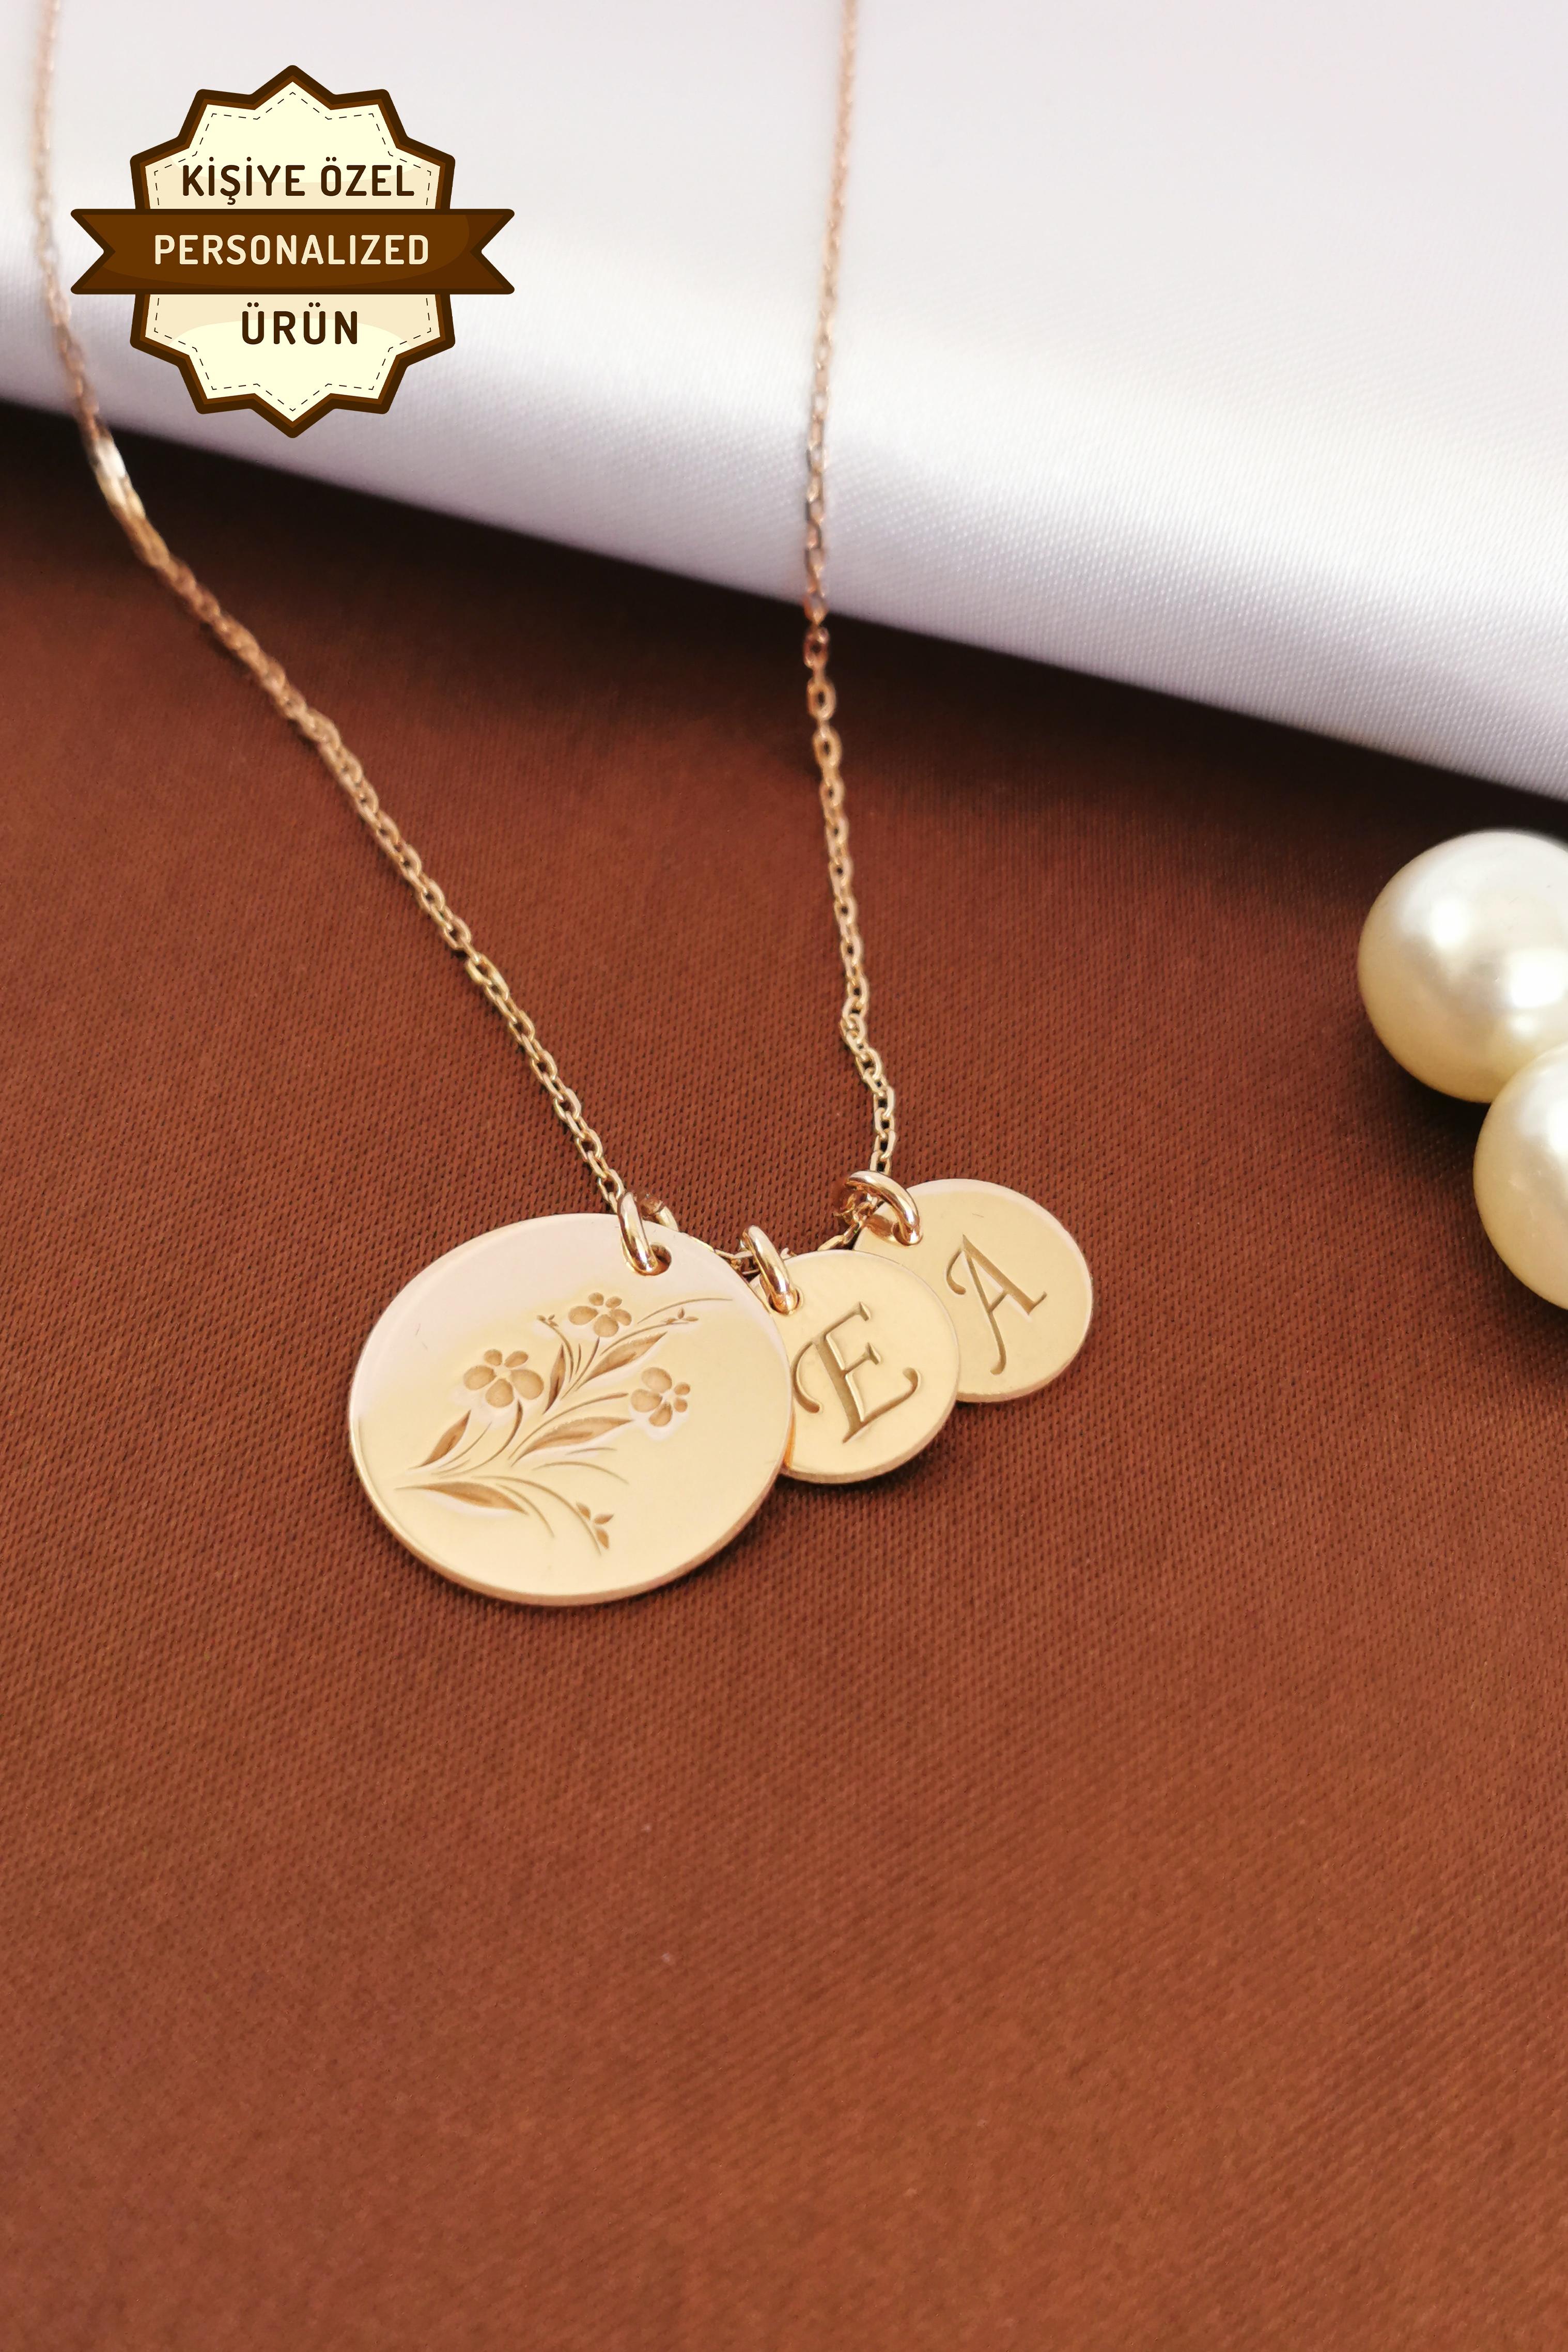 Personalized Engraved Multiple Disc Necklace